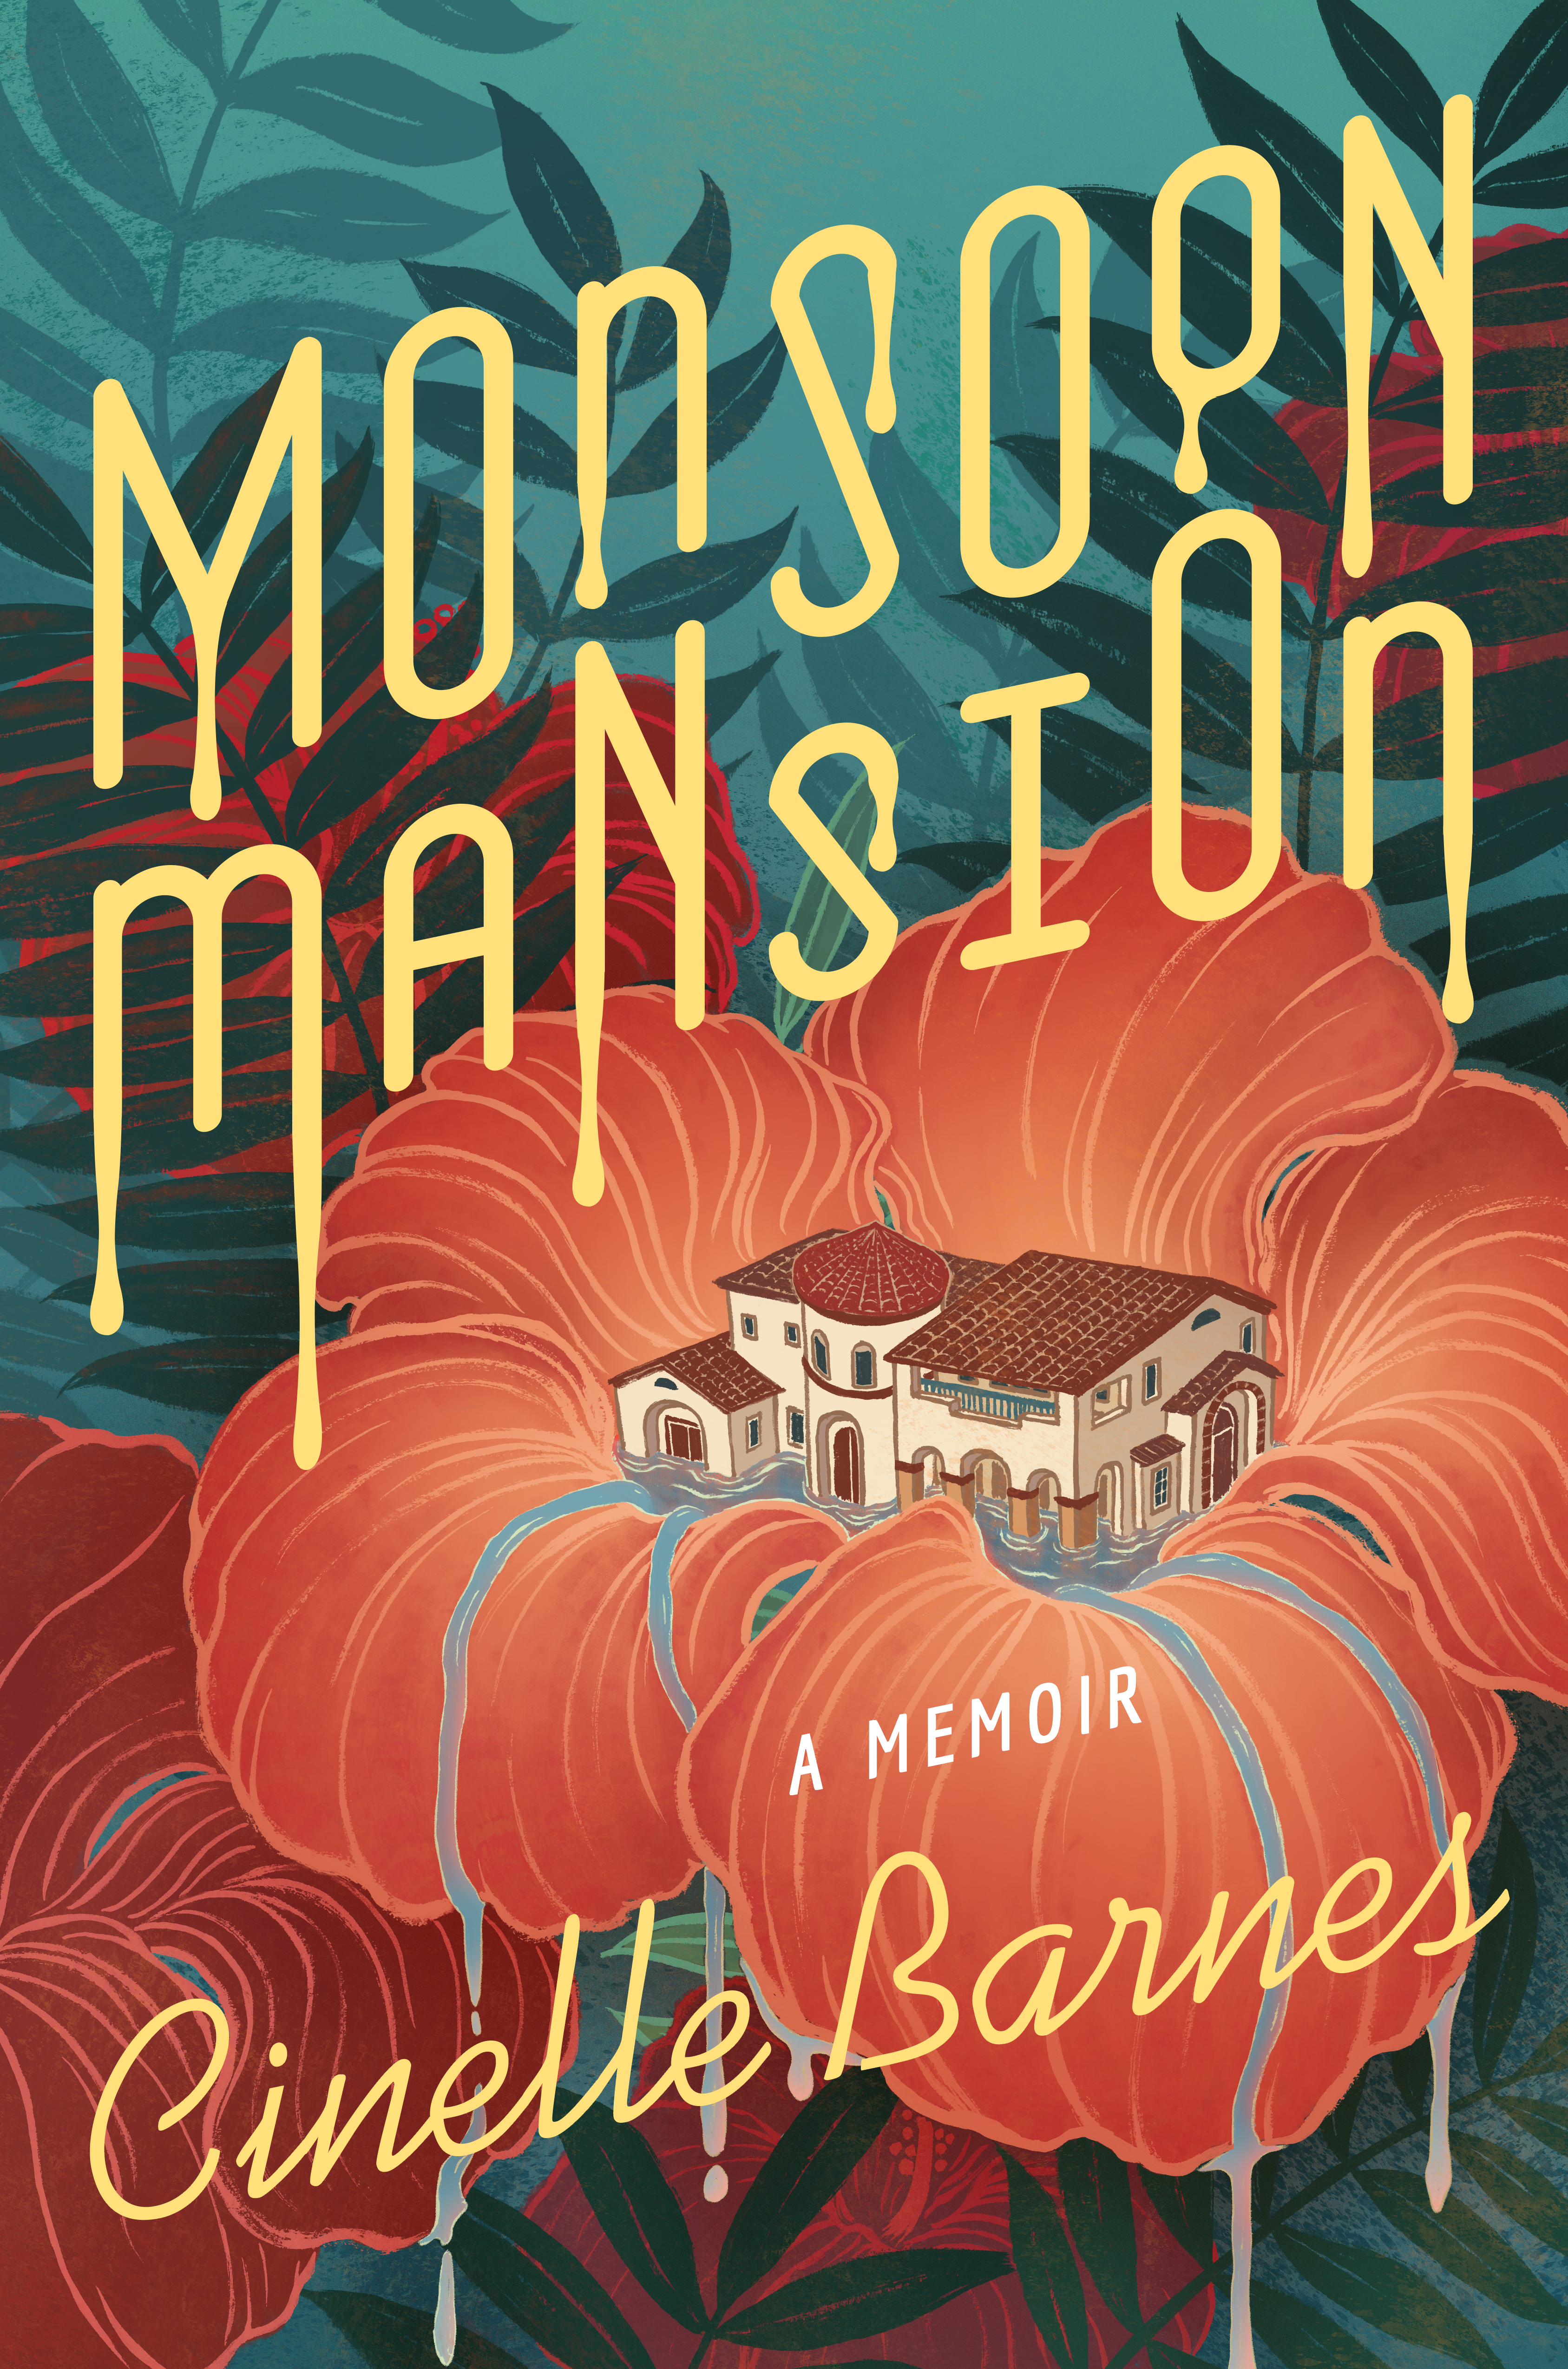 Book Launch: Monsoon Mansion by Cinelle Barnes